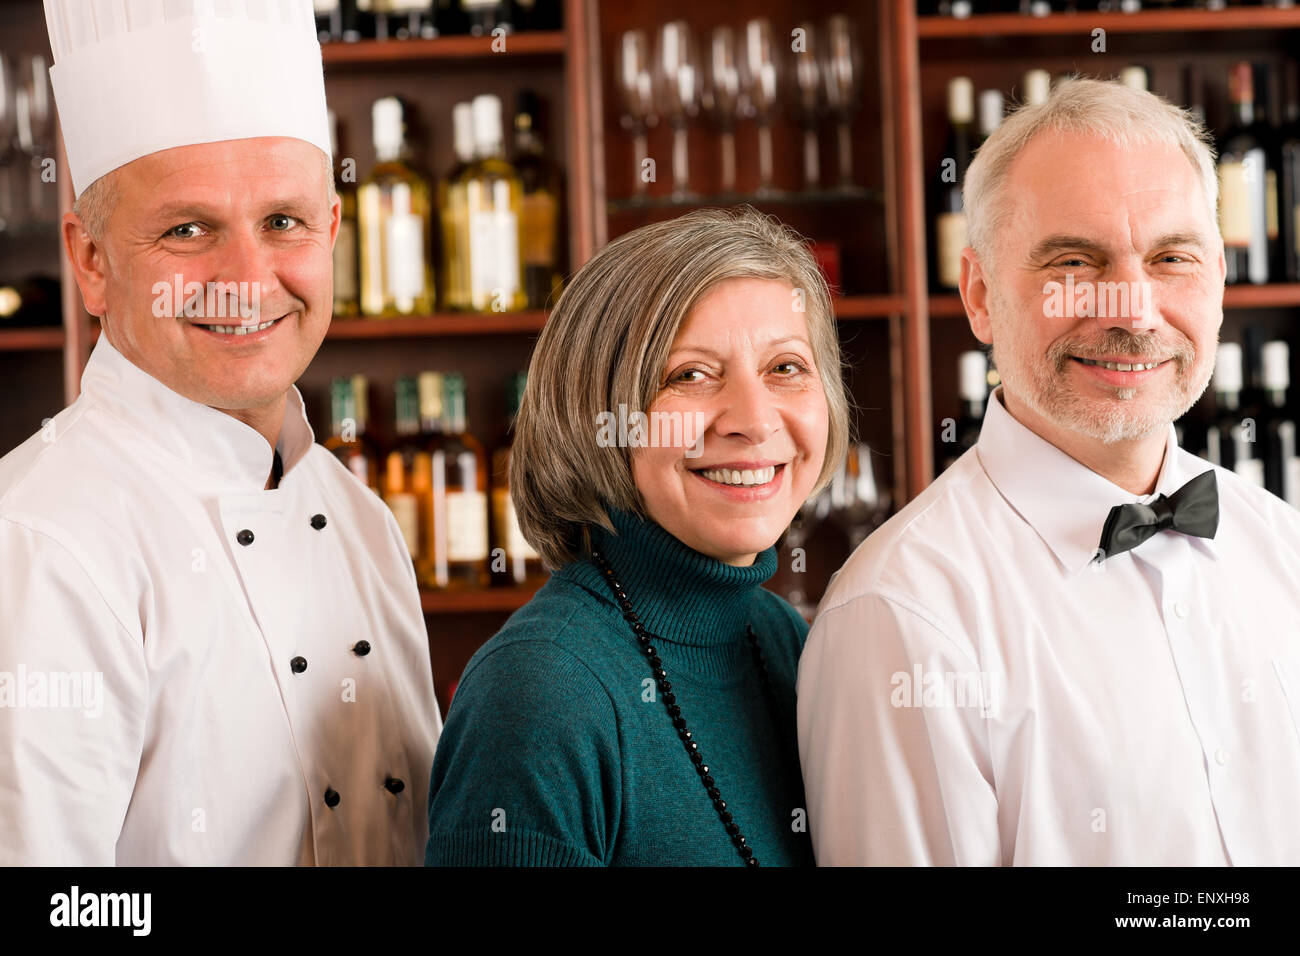 Restaurant manager posing with professional staff Stock Photo